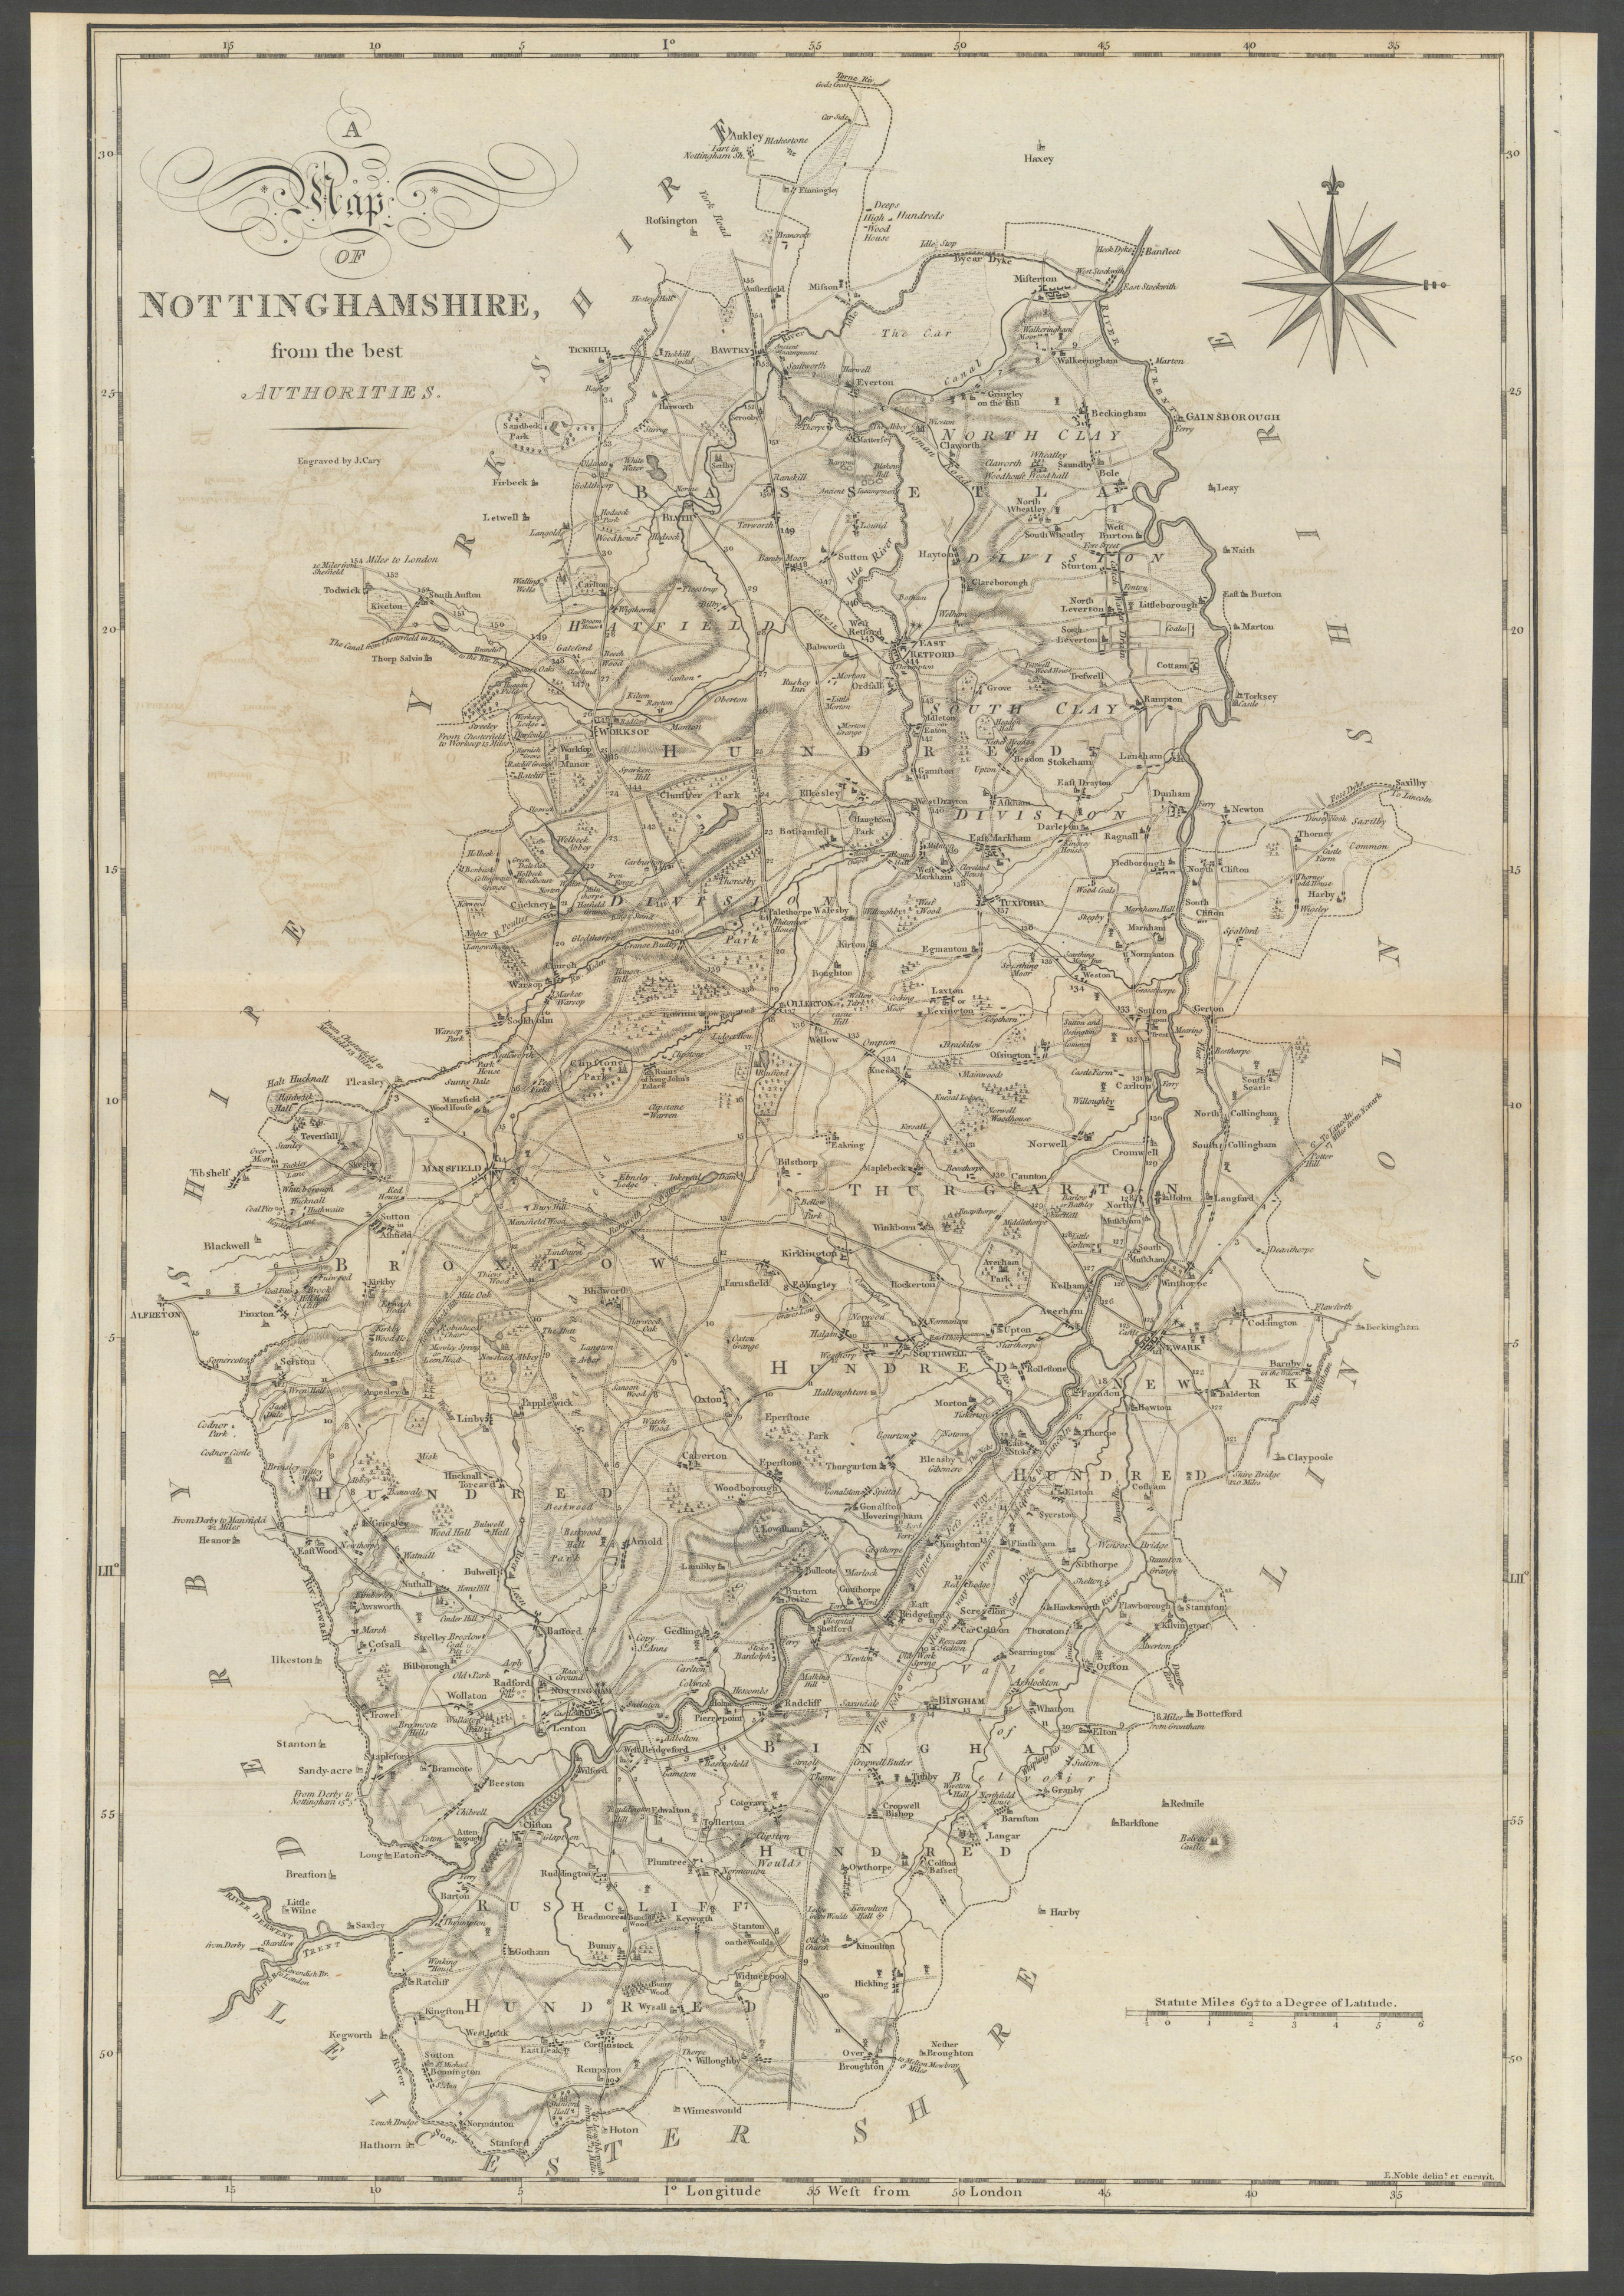 "A map of Nottinghamshire from the best authorities". County map. CARY 1789